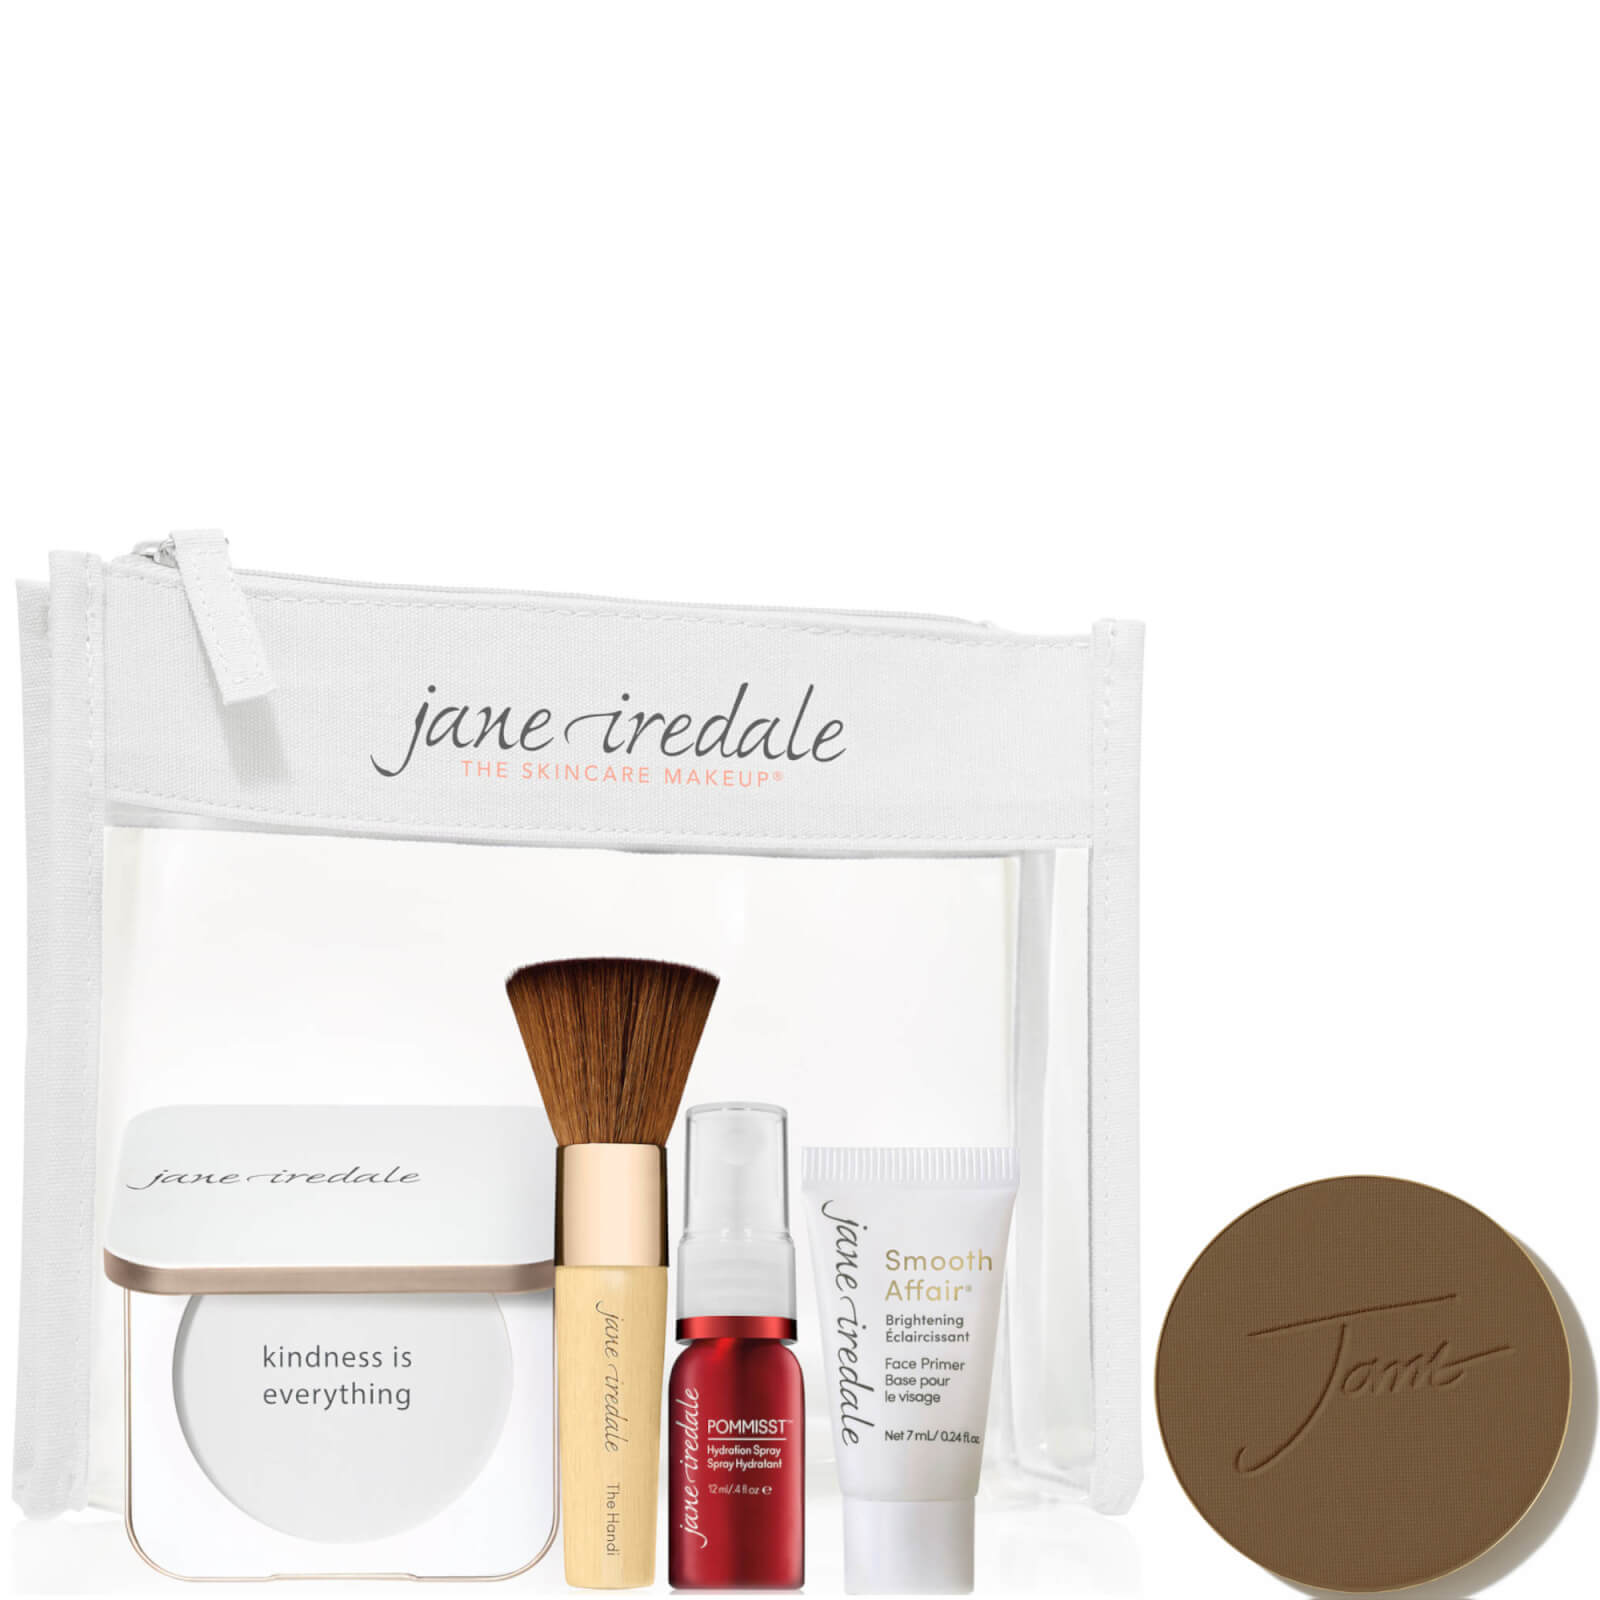 Jane Iredale The Skincare Makeup System Essentials And Purepressed Mineral Foundation Bundle (various Shades) (wo In Mohogany